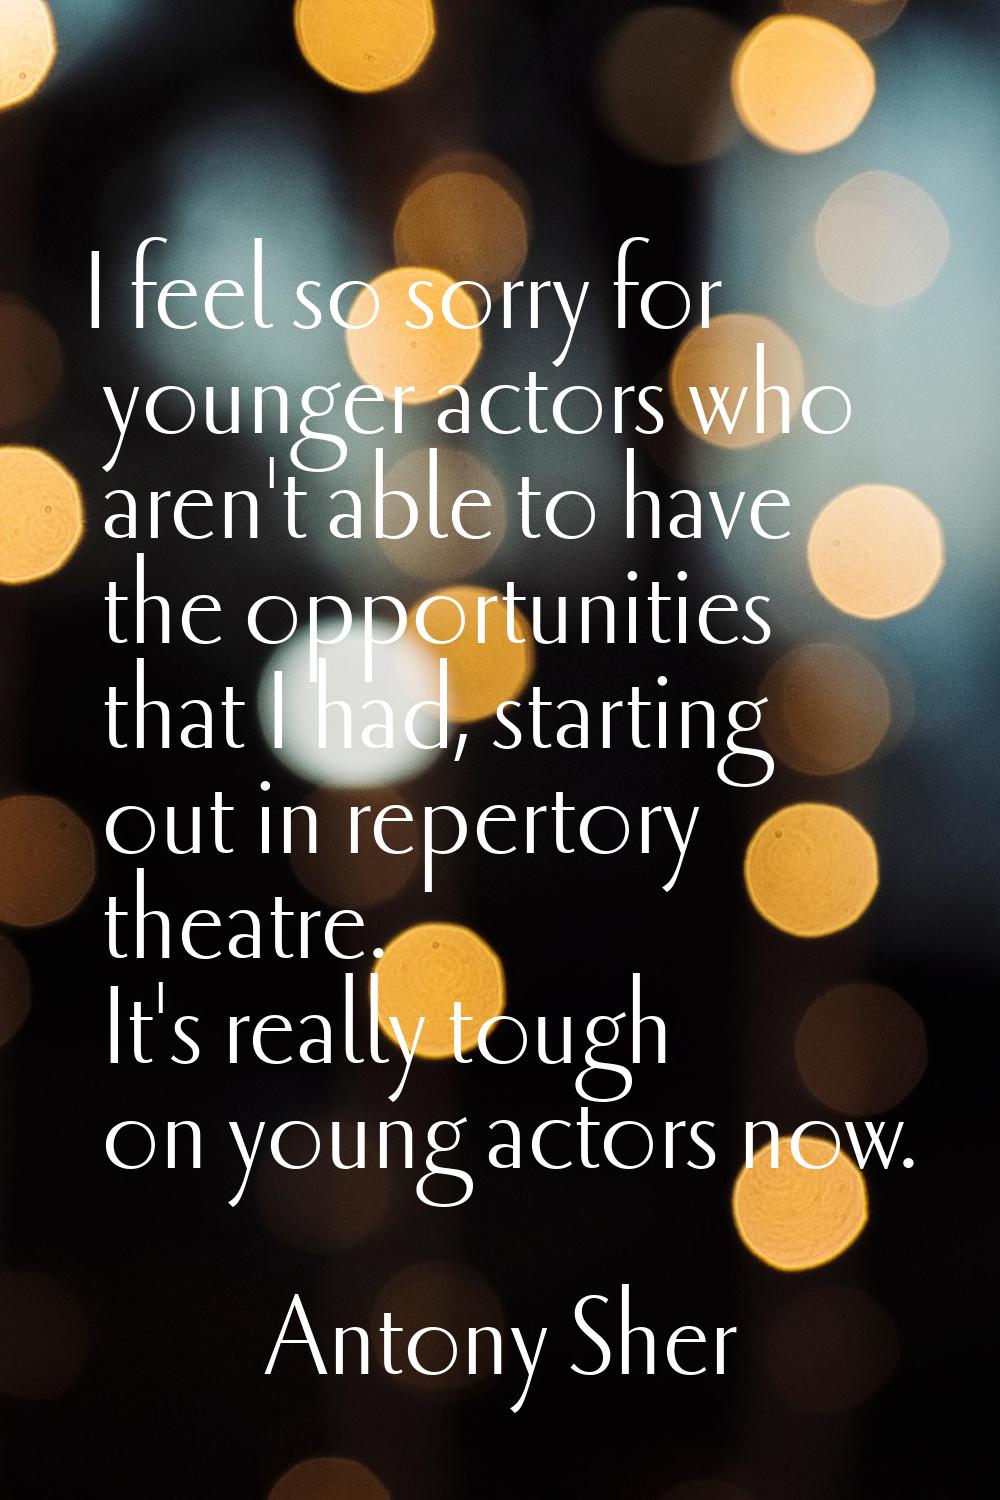 I feel so sorry for younger actors who aren't able to have the opportunities that I had, starting o